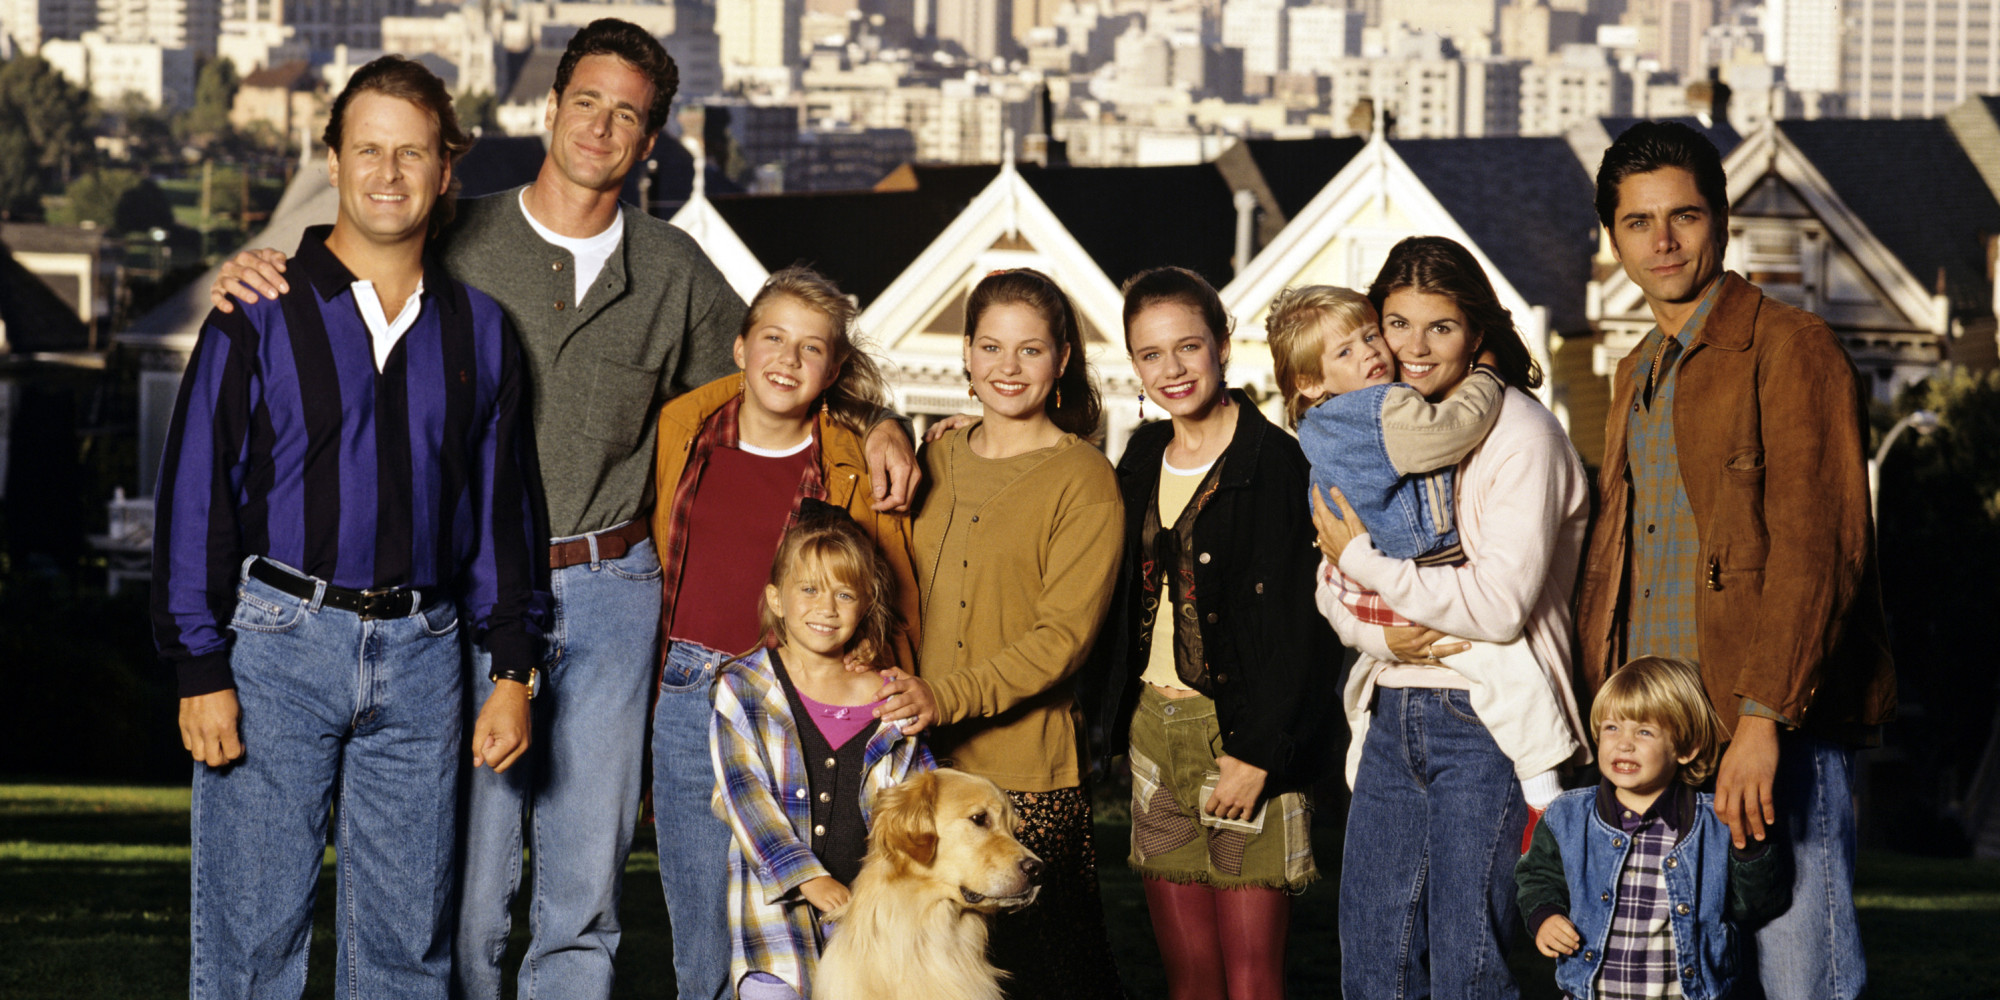 TV Show Full House (1987) HD Wallpaper | Background Image